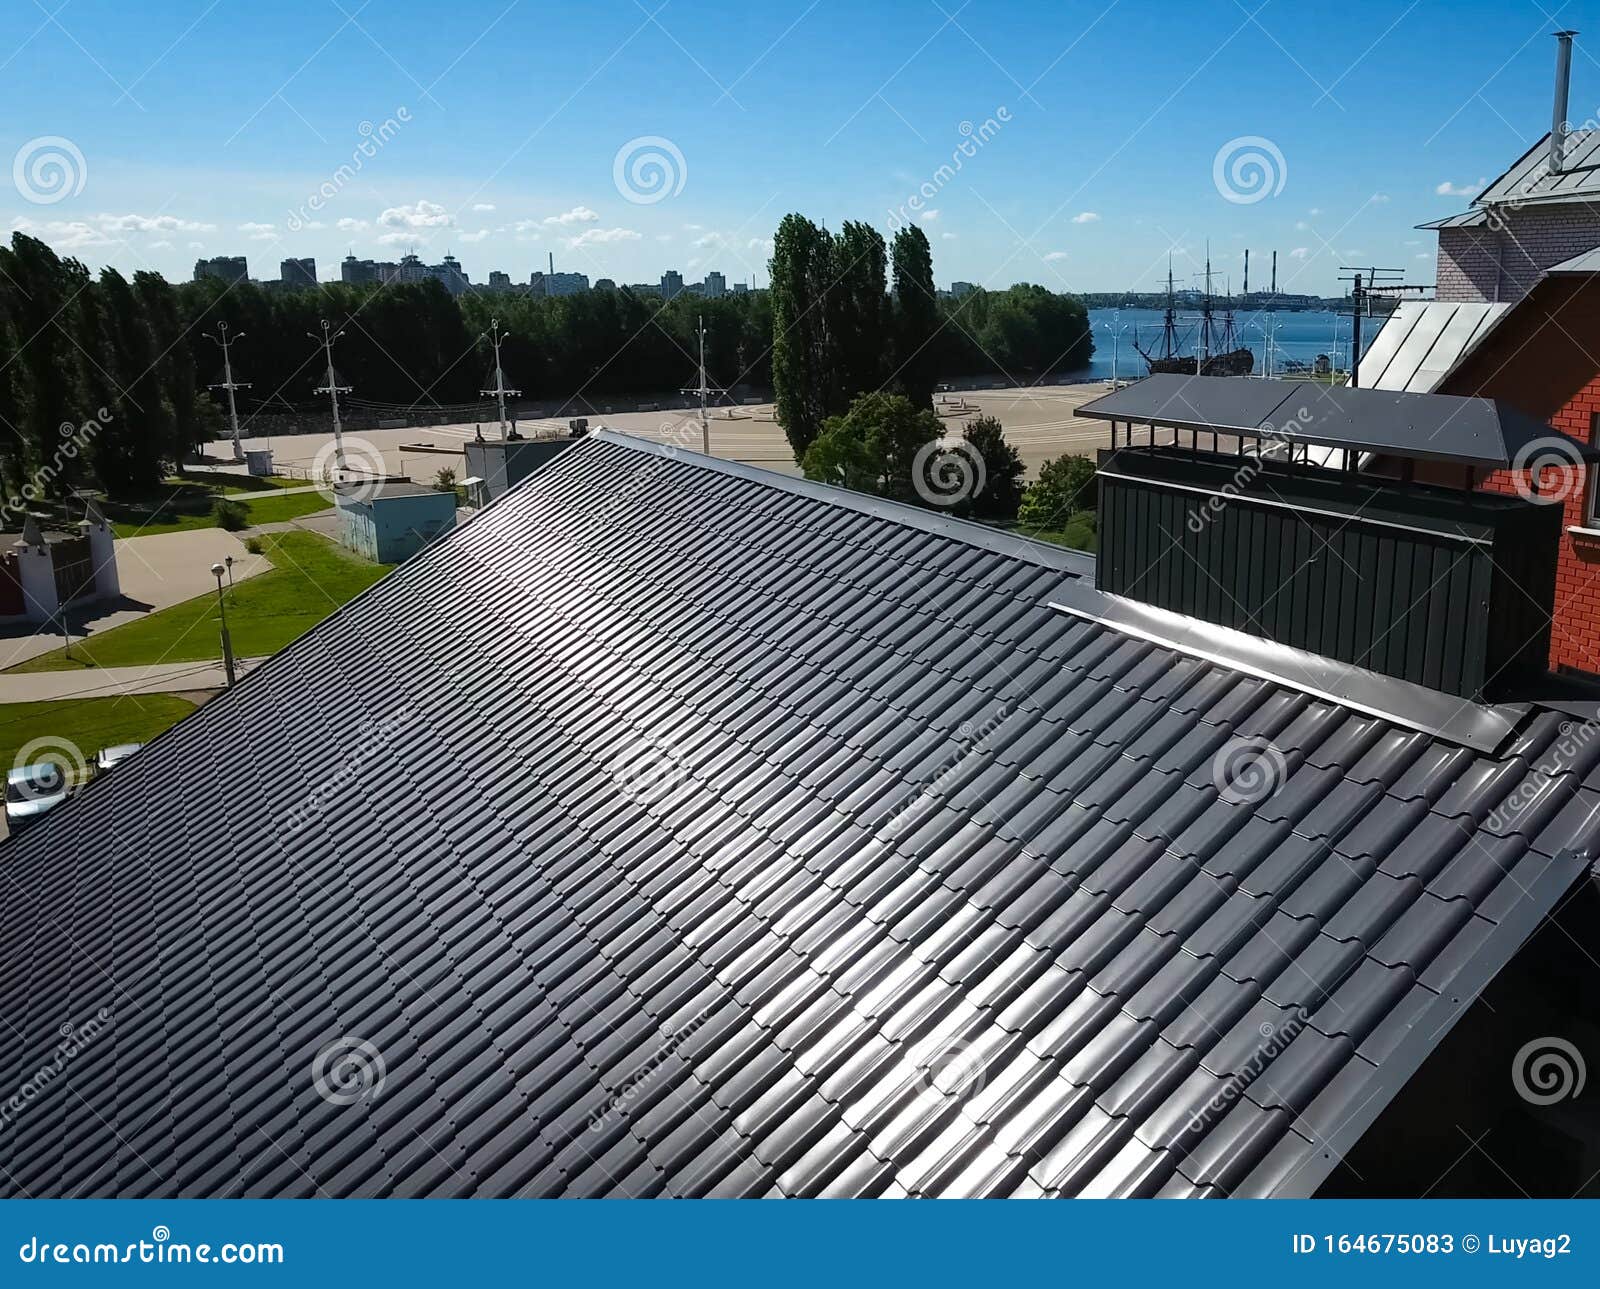 House With A Gray Metal Roof. Corrugated Metal Roof And Metal Ro Stock Image Image of coating